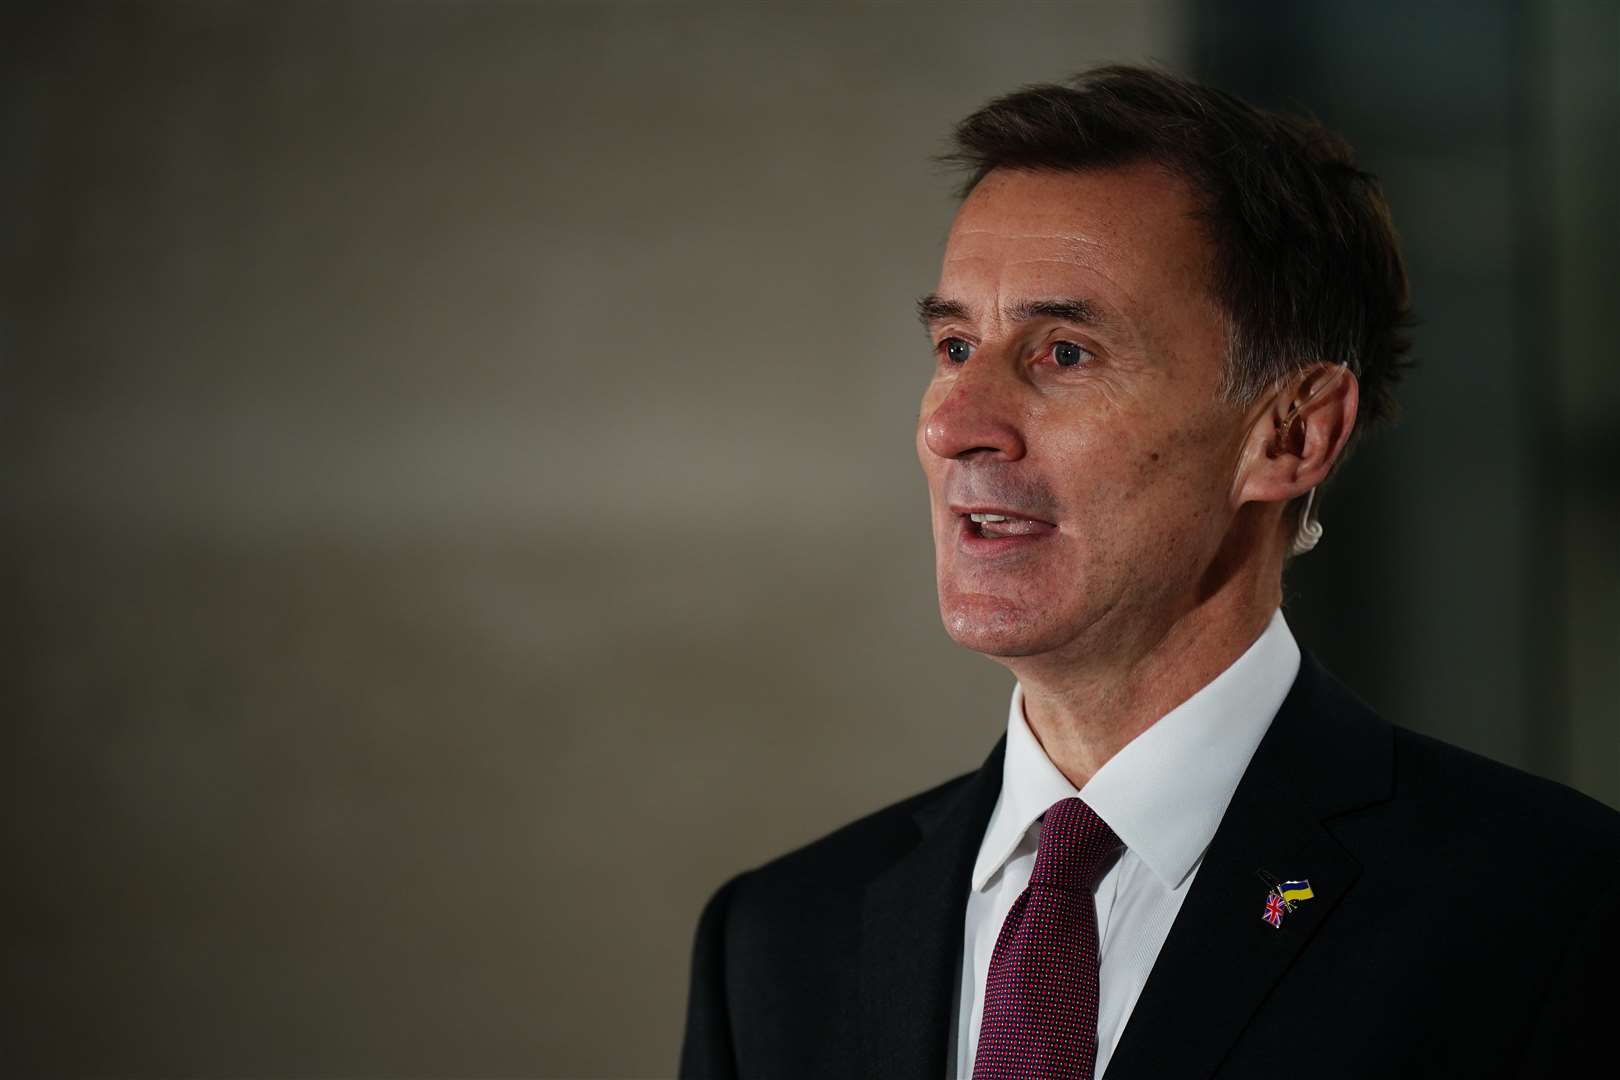 Chancellor of the Exchequer Jeremy Hunt is thinking about handing British Steel £300 million in instalments over the next few years, according to a Treasury source (Aaron Chown/PA)